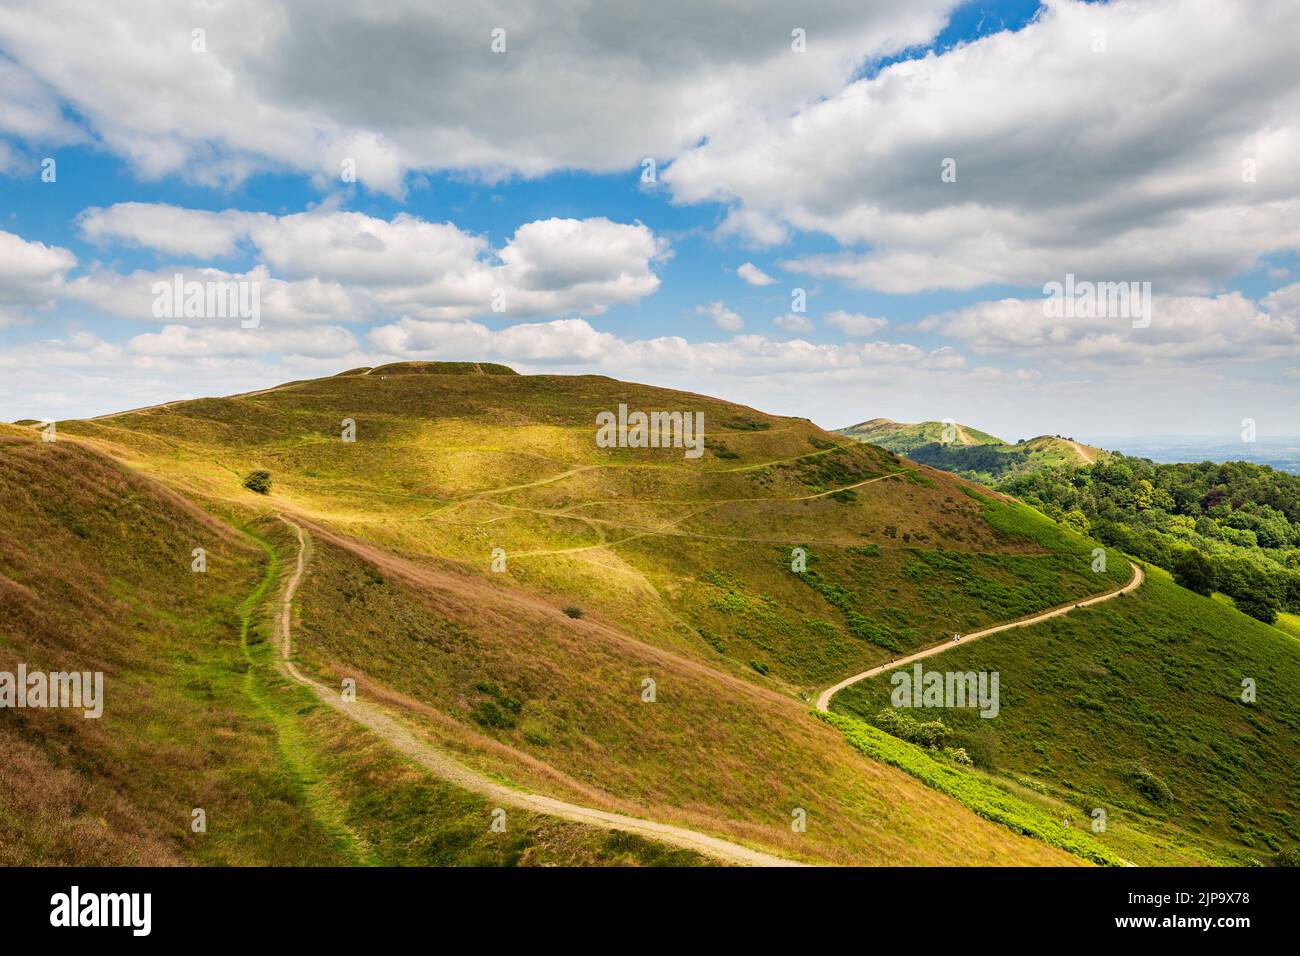 The Earthworks of British Camp Iron Age Fort in the Malvern Hills, Worcestershire, England Stock Photo